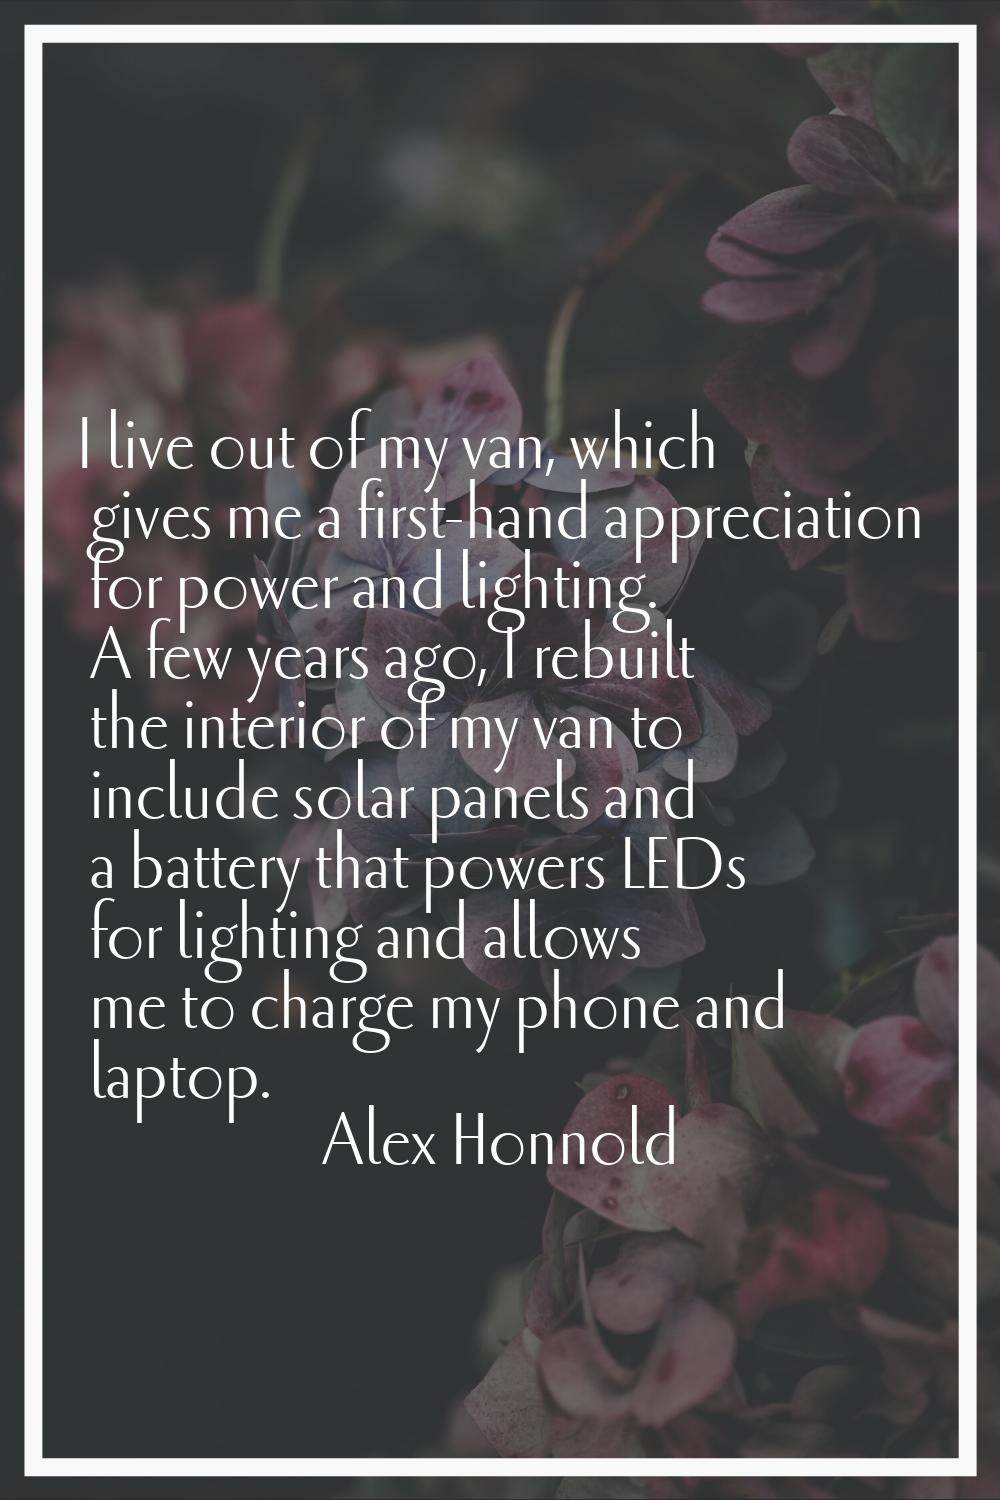 I live out of my van, which gives me a first-hand appreciation for power and lighting. A few years 